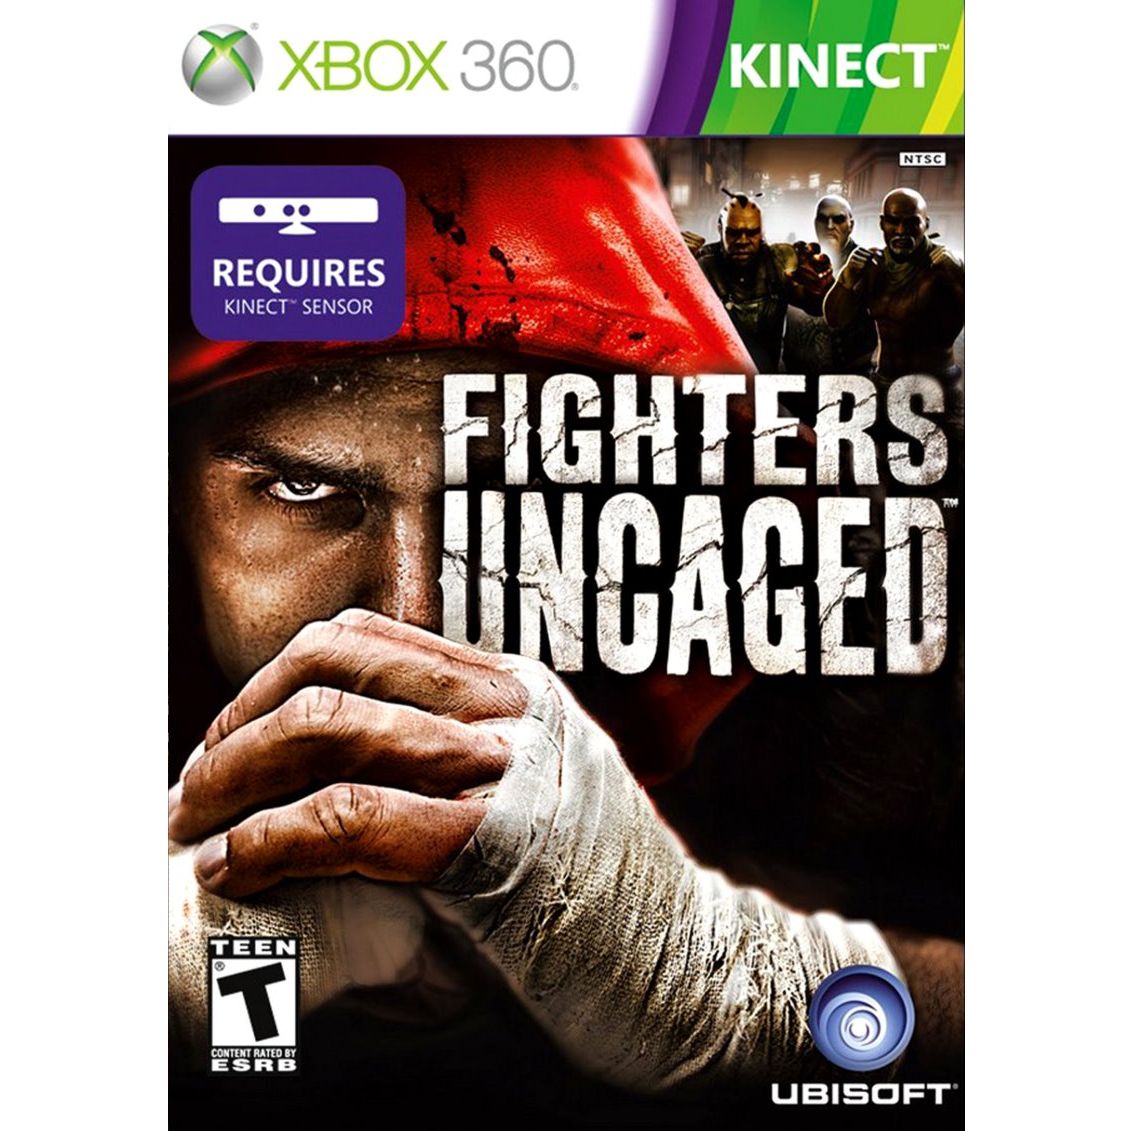 Microsoft Xbox 360 S 250GB Console with Kinect Controller, Sports & Fighters Uncaged Games at John Lewis